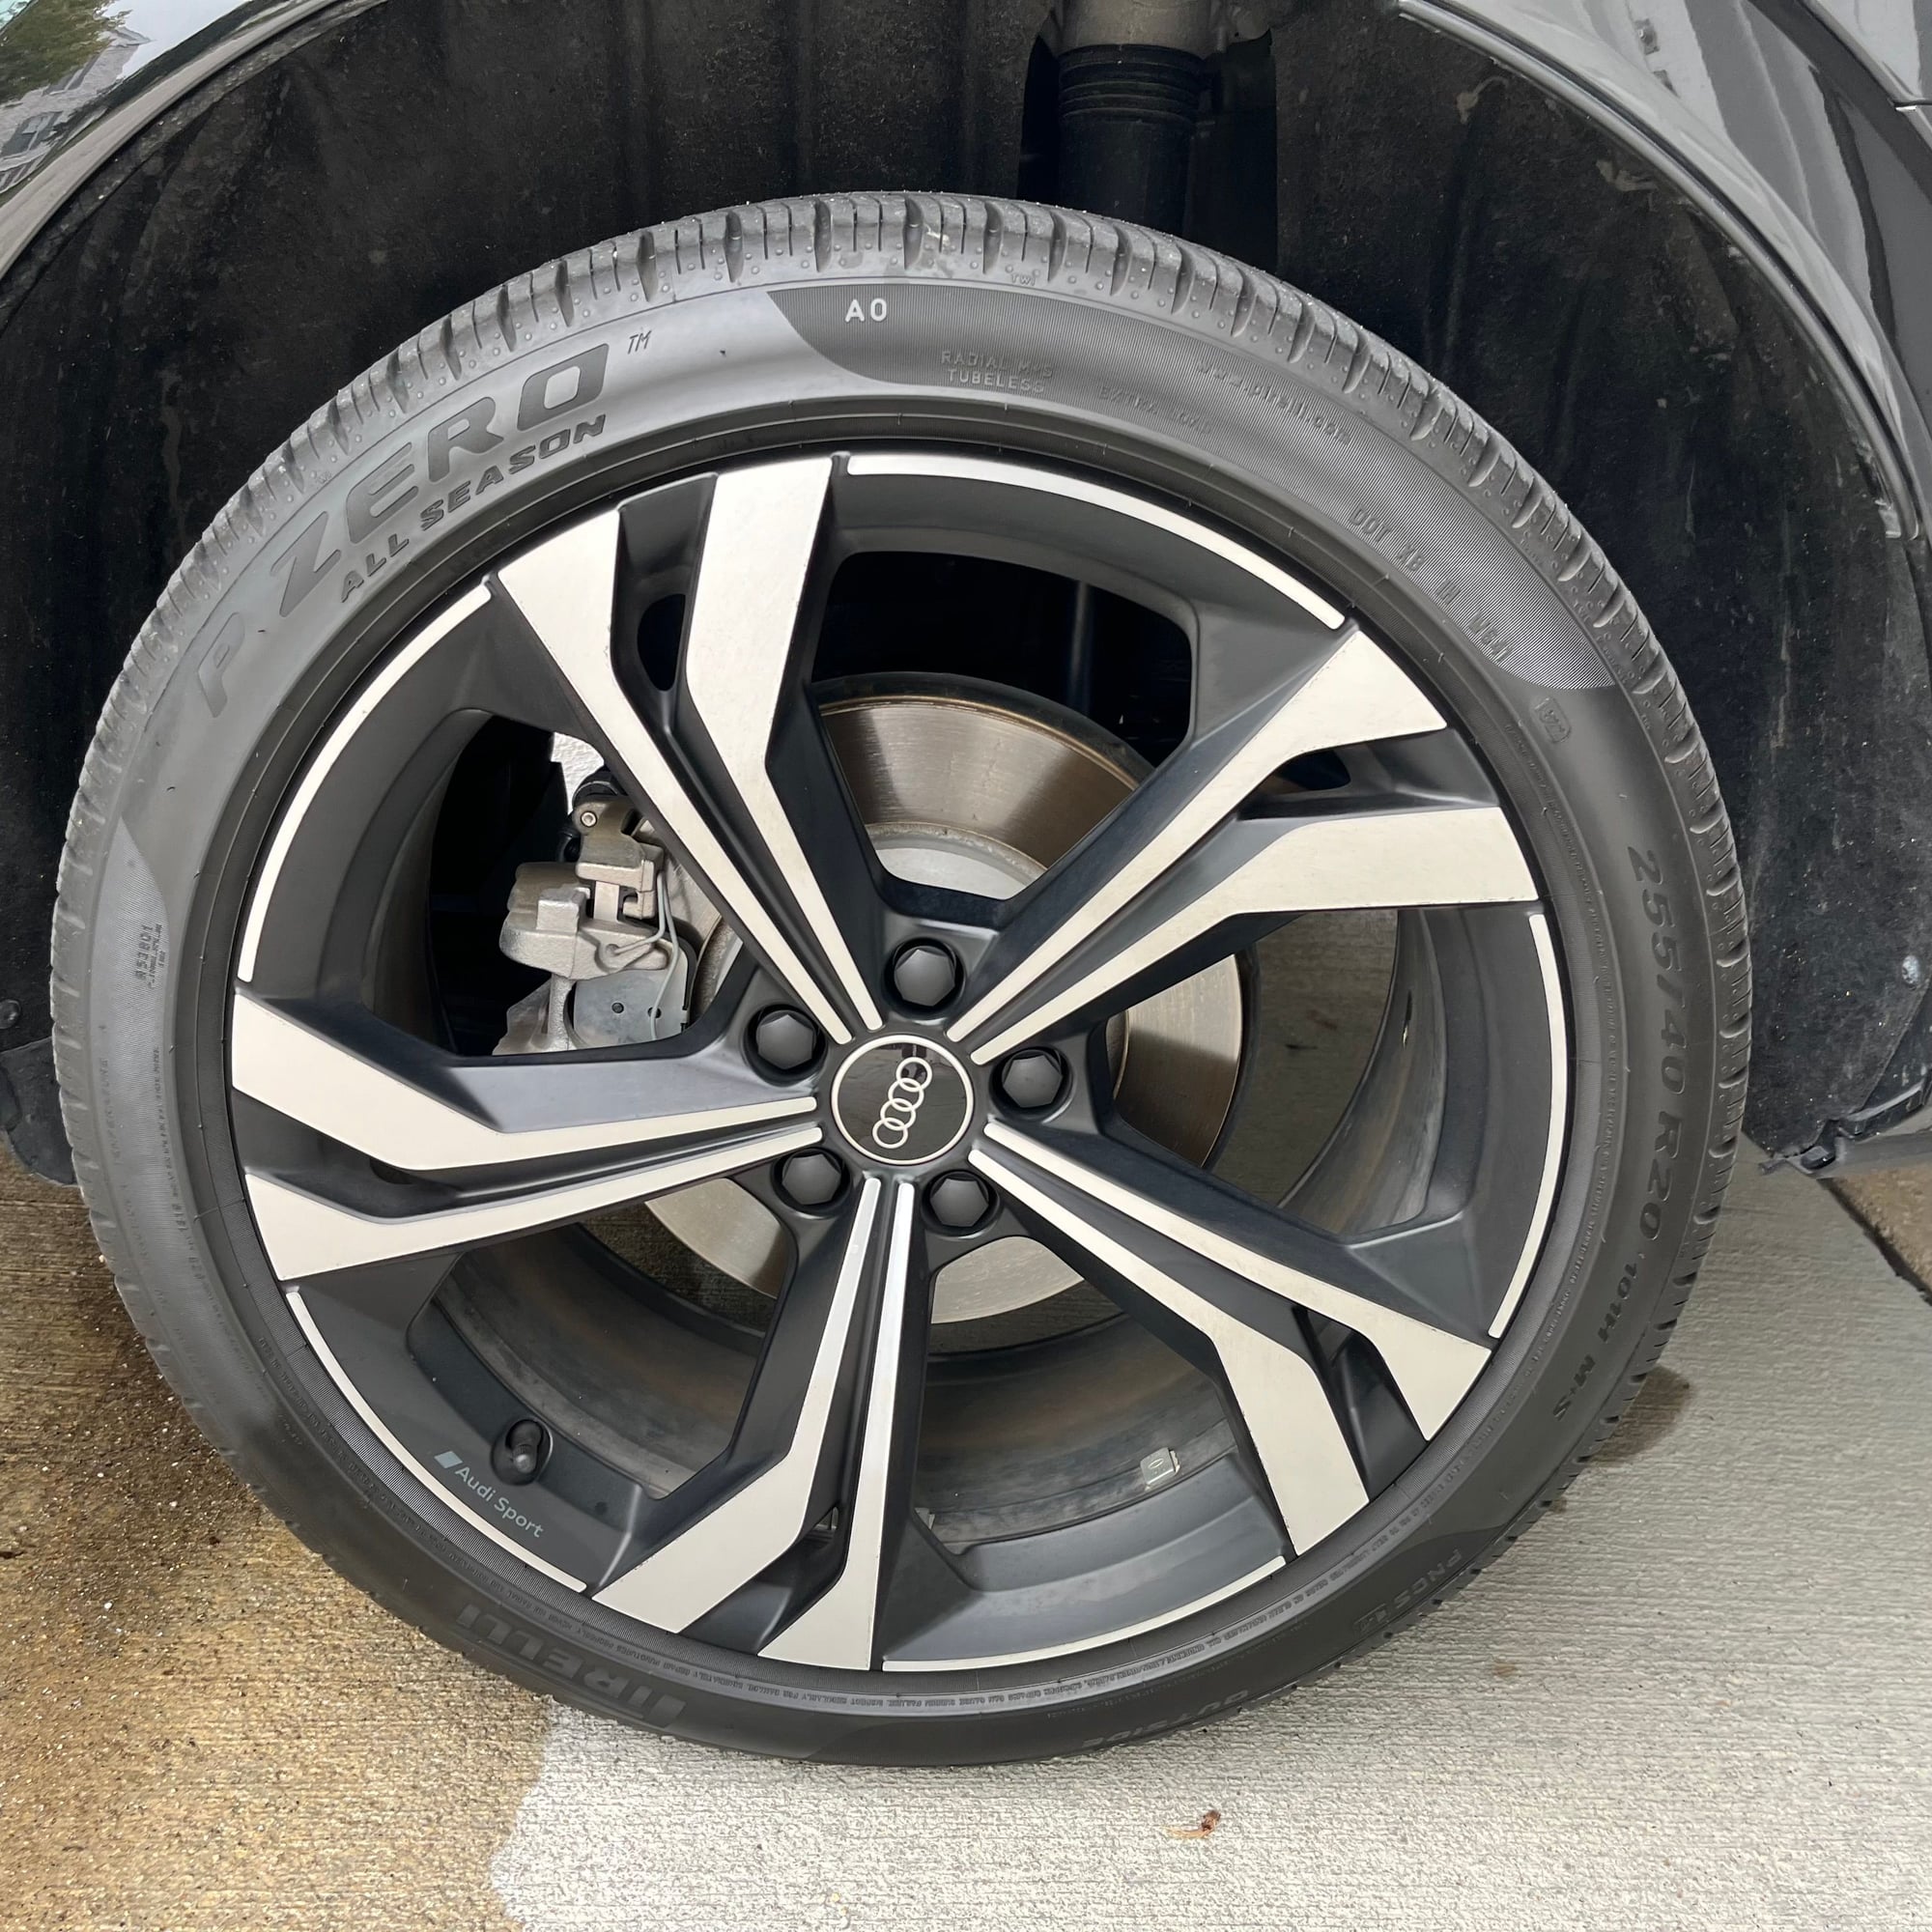 Wheels and Tires/Axles - For Sale 20' 2023 Audi Q3 Wheels & Tires. - Used - 2023 Audi Q3 Quattro - Fort Dodge, IA 50501, United States